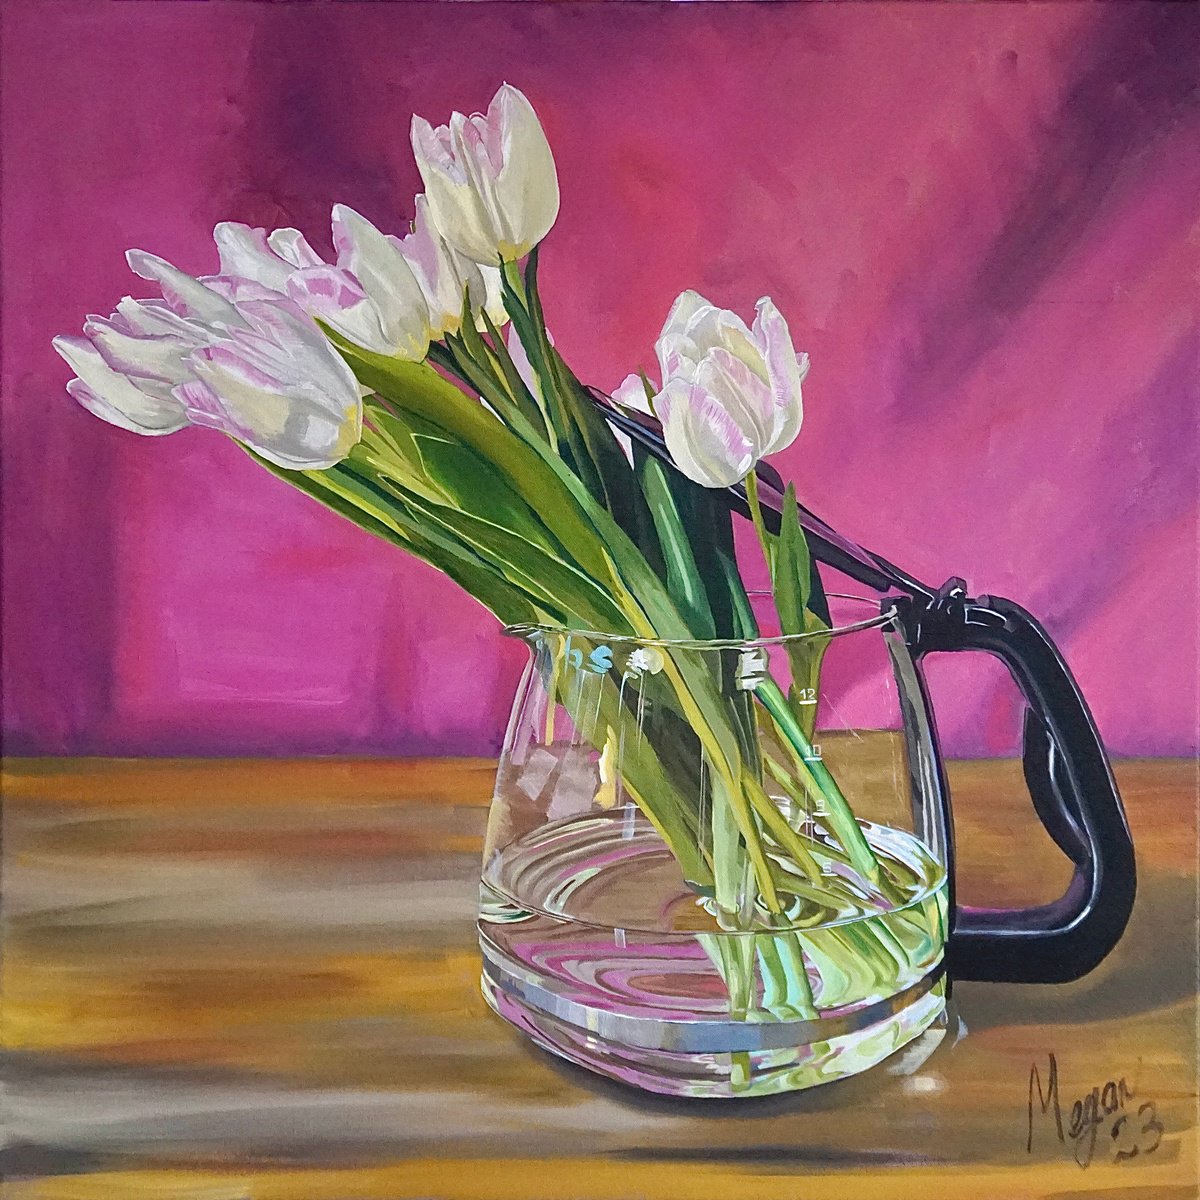 Stuff of Life Container and Tulips by Megan Cheetham